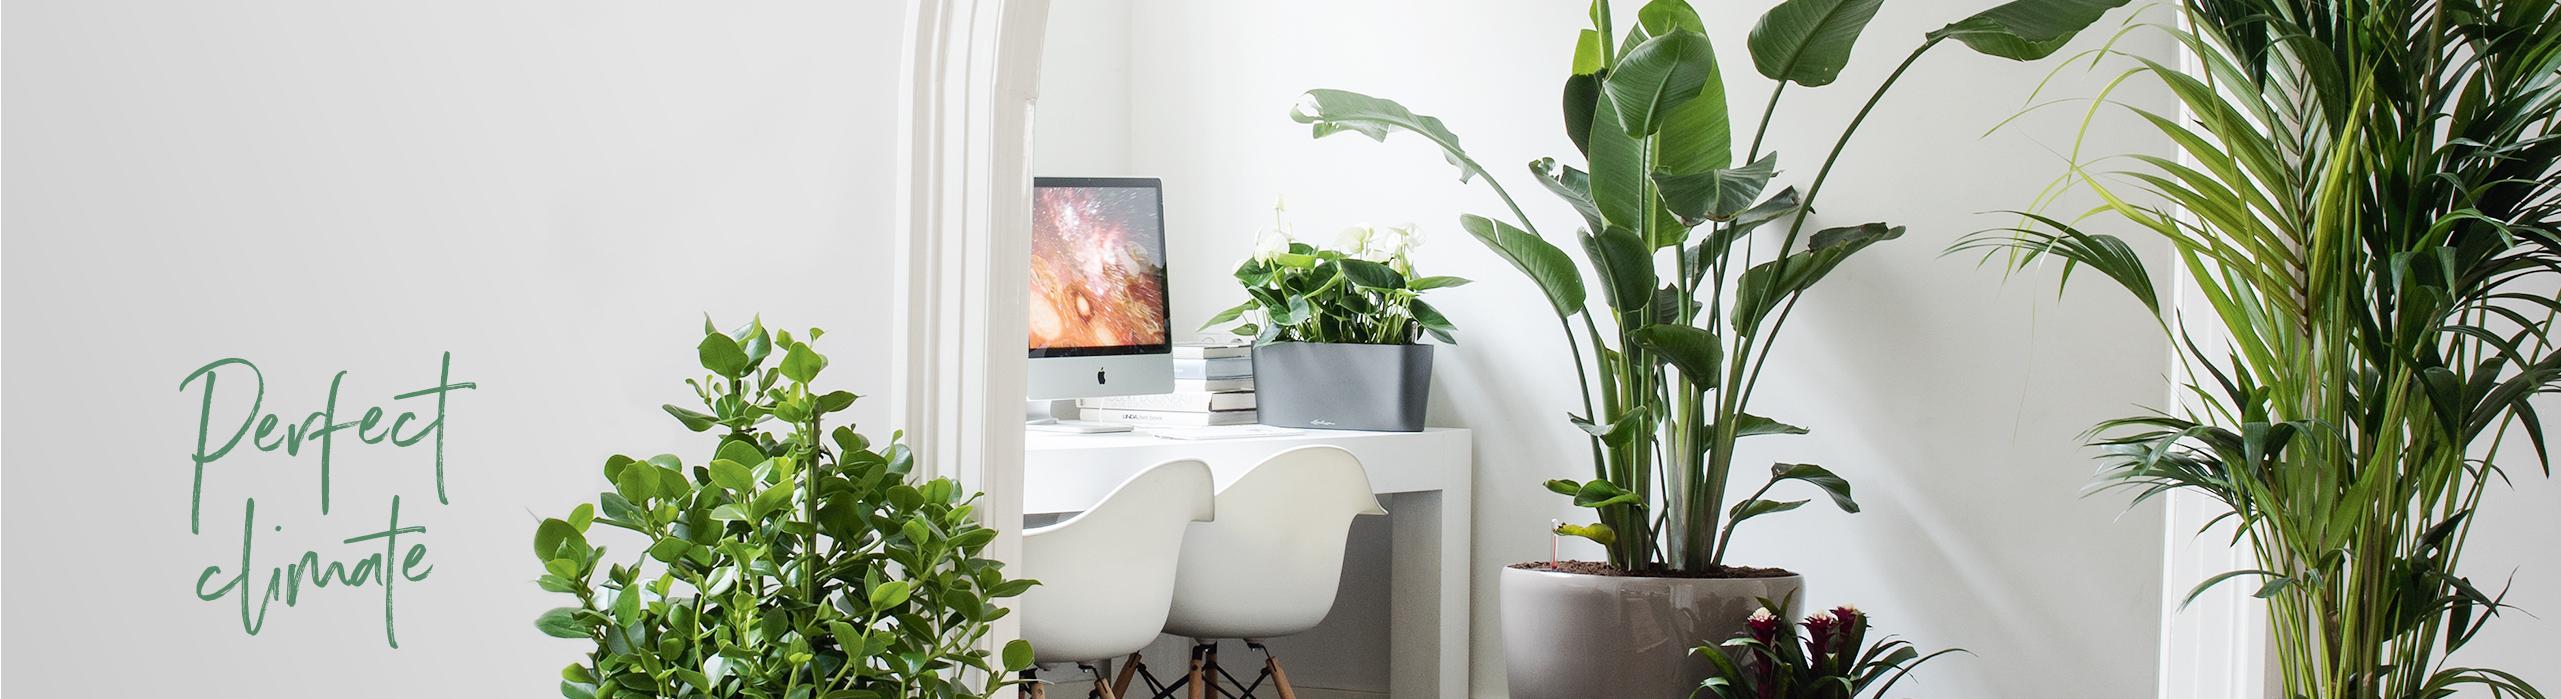 In my opinion, indoor plants are an absolute game-changer for decoration. I  believe they not only enhance the aesthetics but also bring a refreshing  vibe to any space. Additionally, taking care of